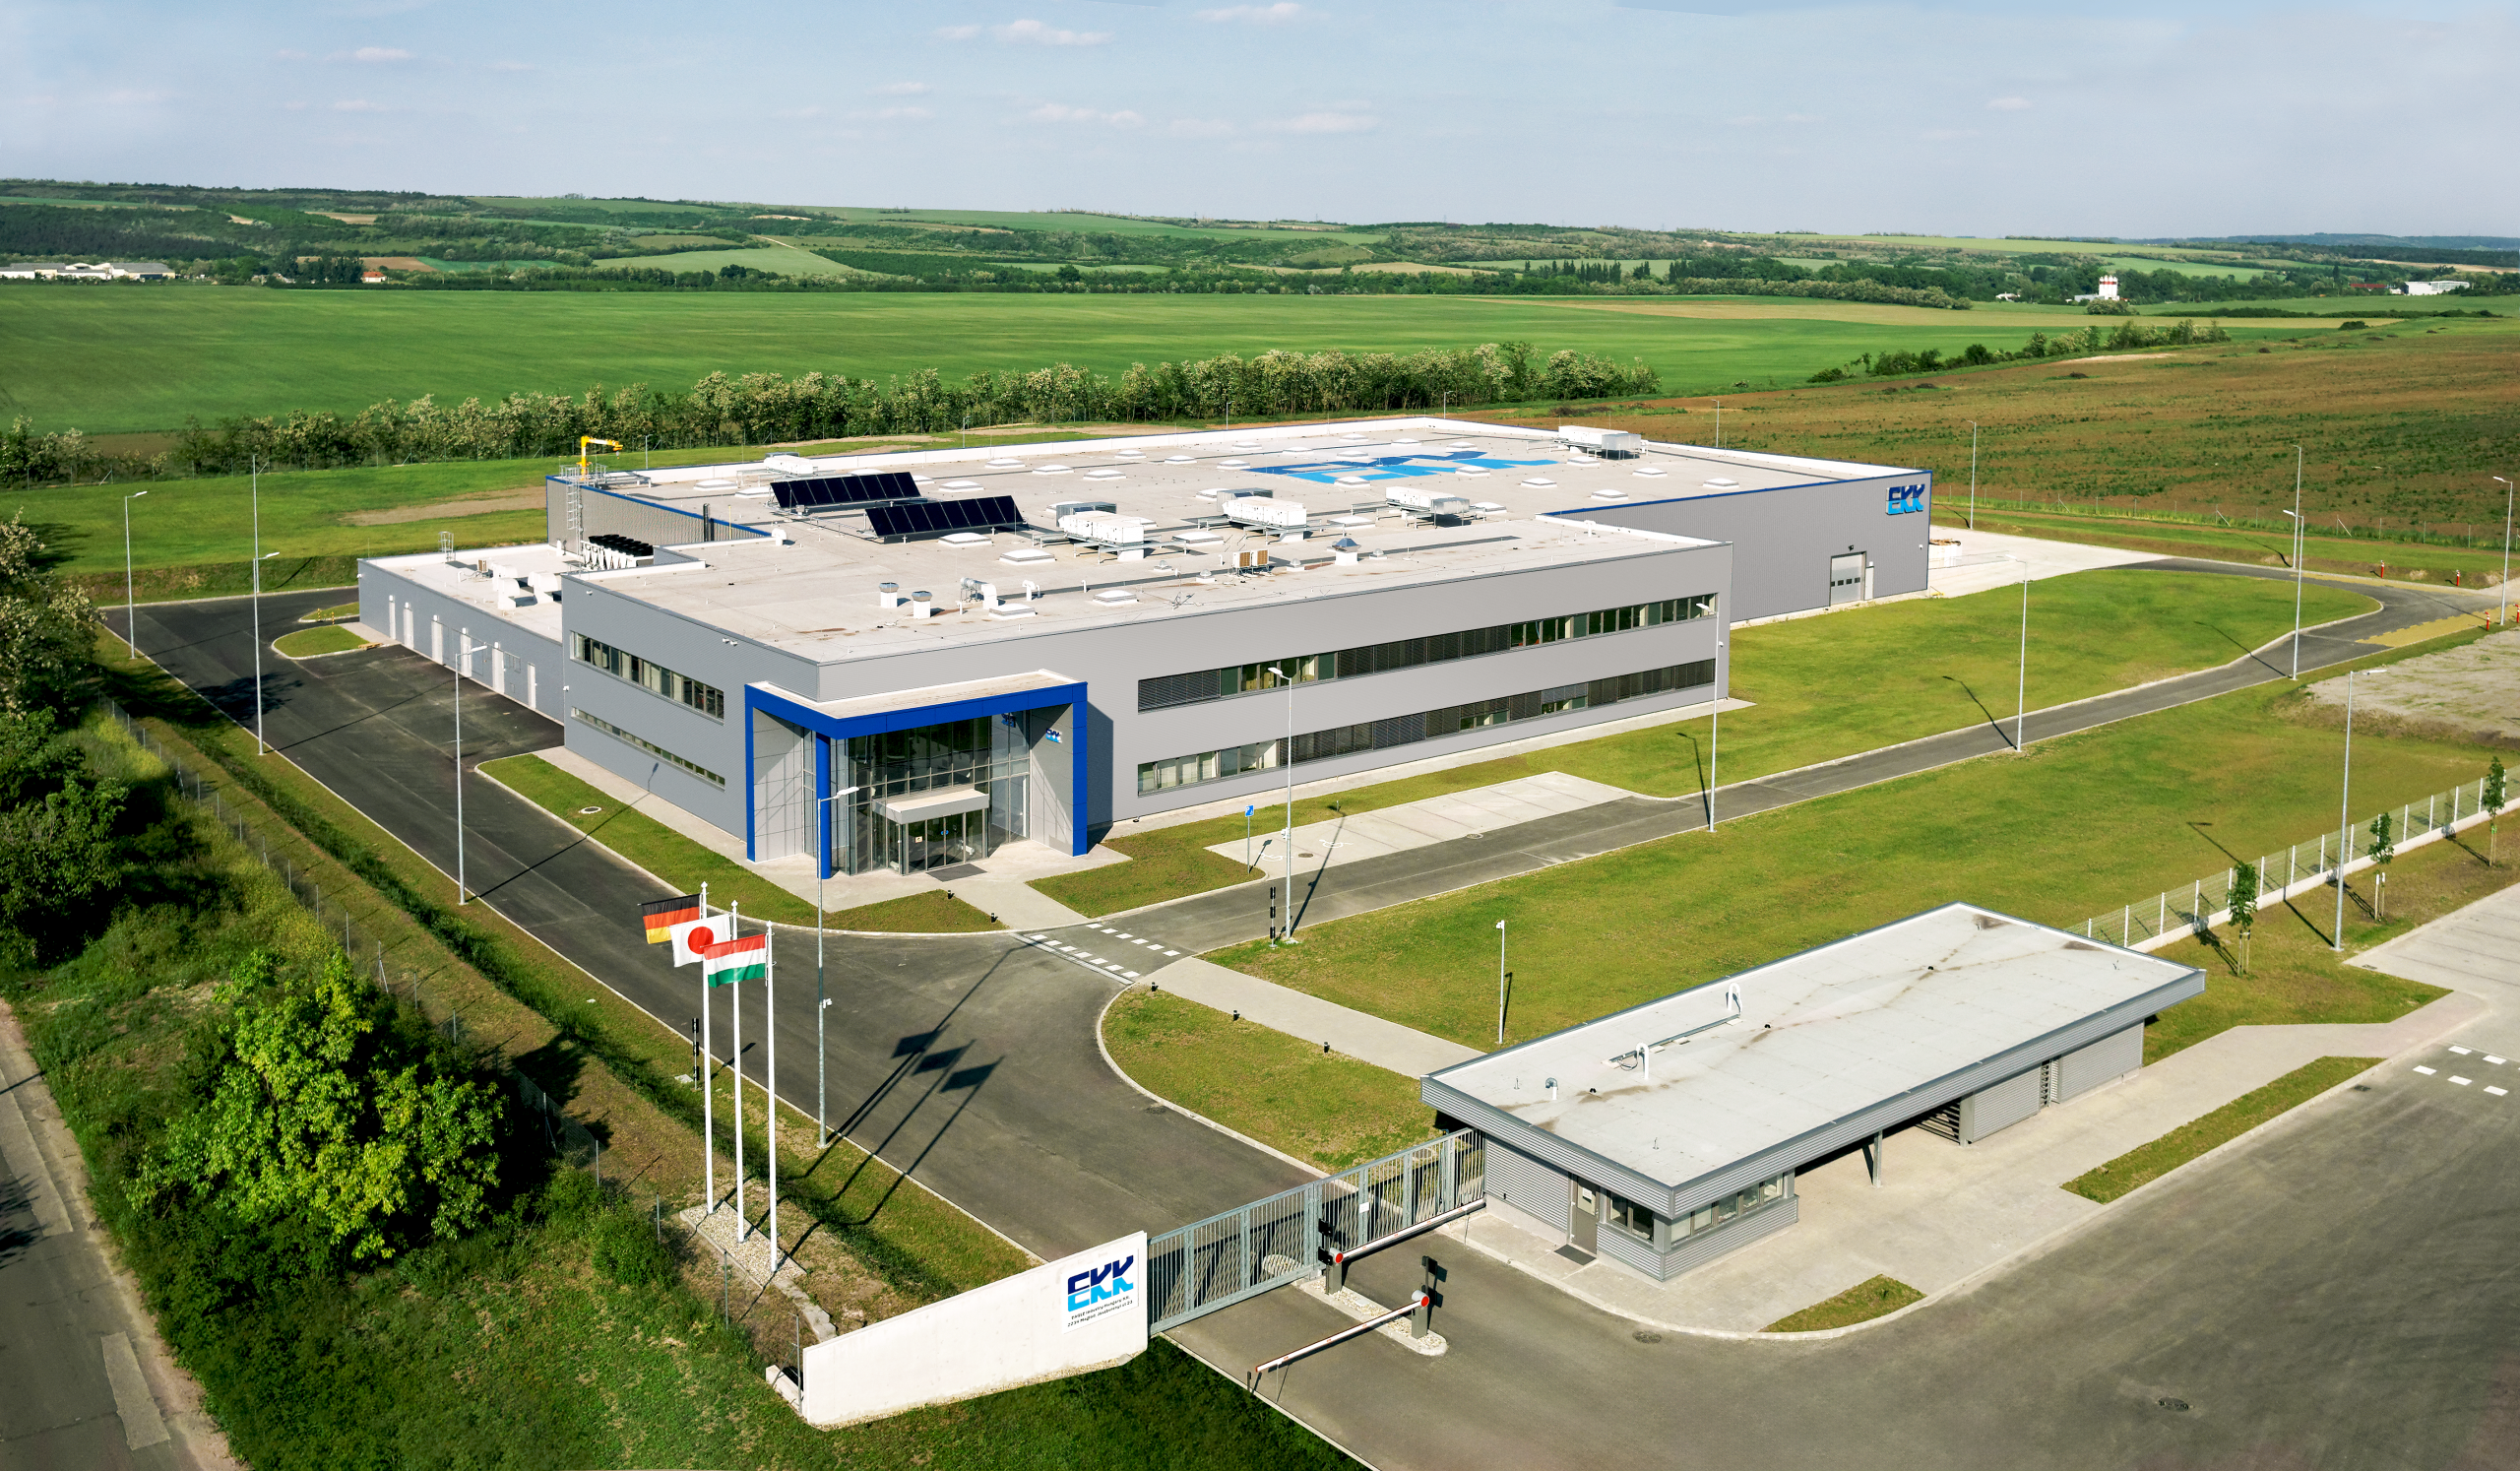 Factory EAGLE Industrial Hungary Ltd. built by Takenaka Europe in 2016.